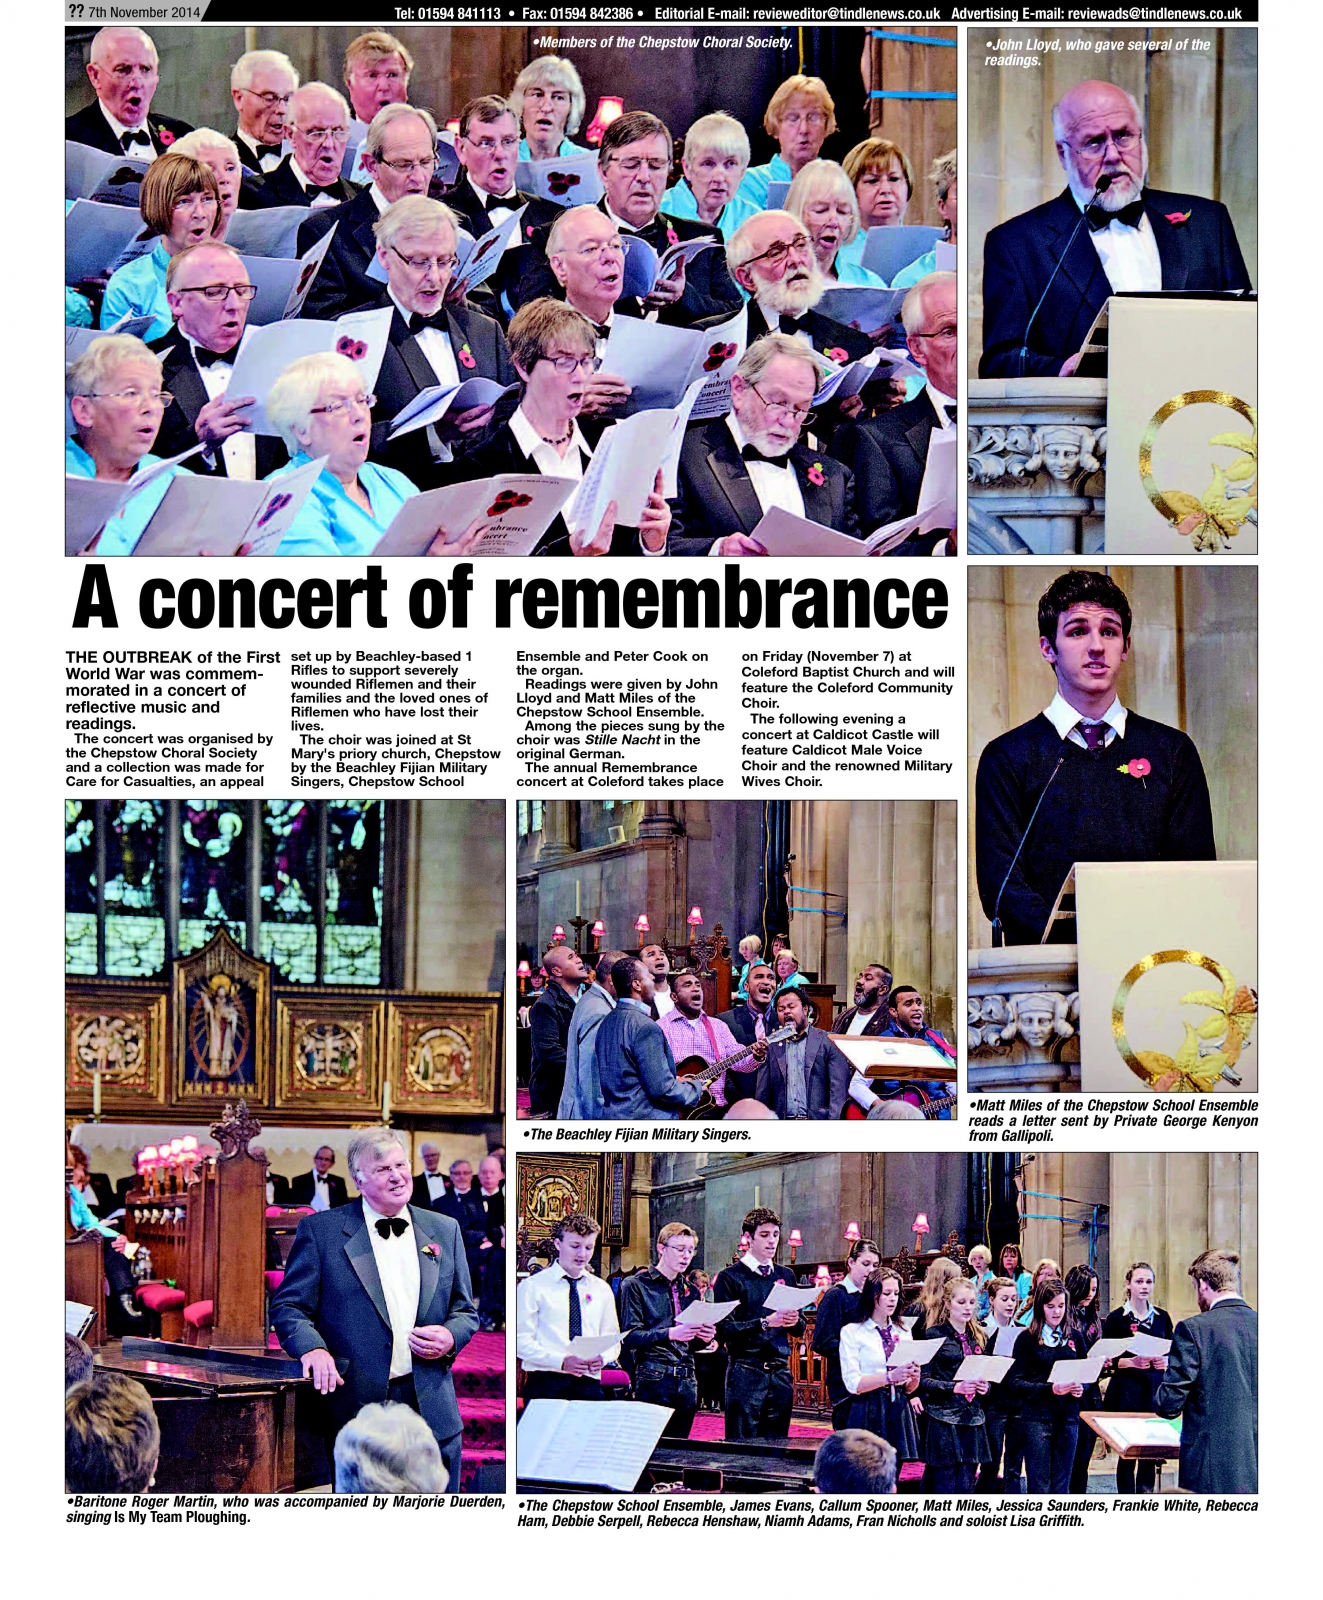 A Concert of Remembrance